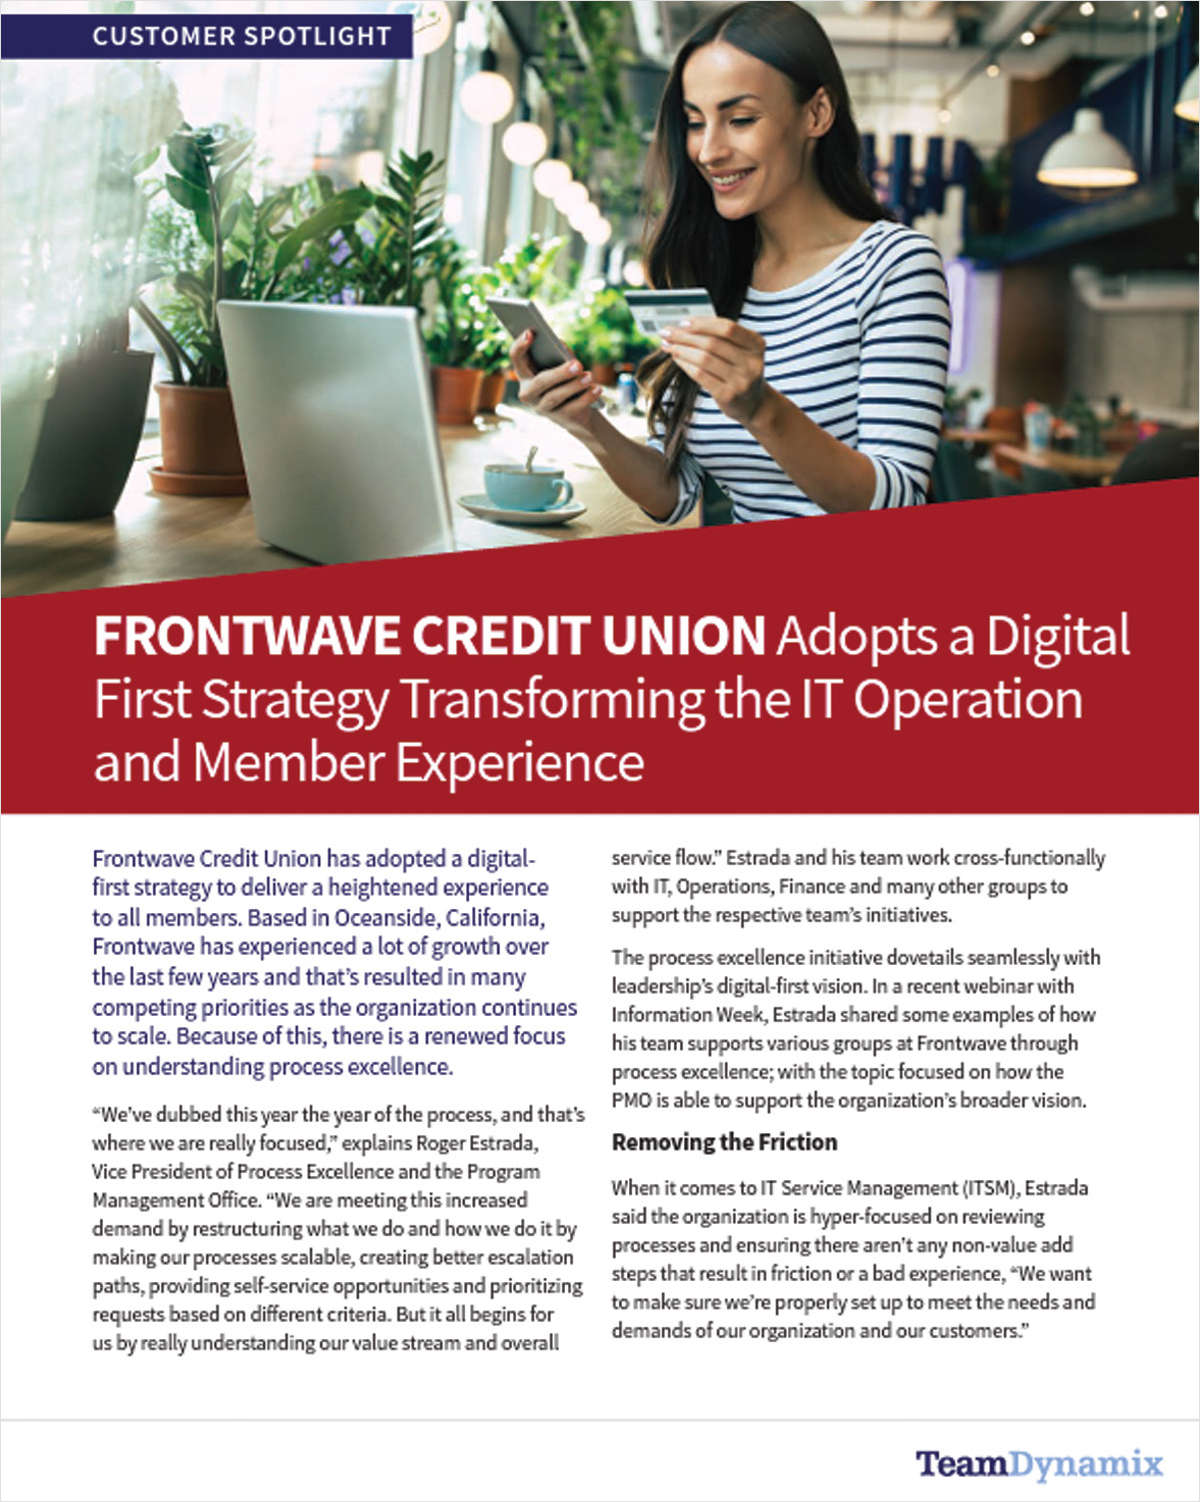 Frontwave Credit Union Adopts a Digital First Strategy Transforming the IT Operation and Member Experience